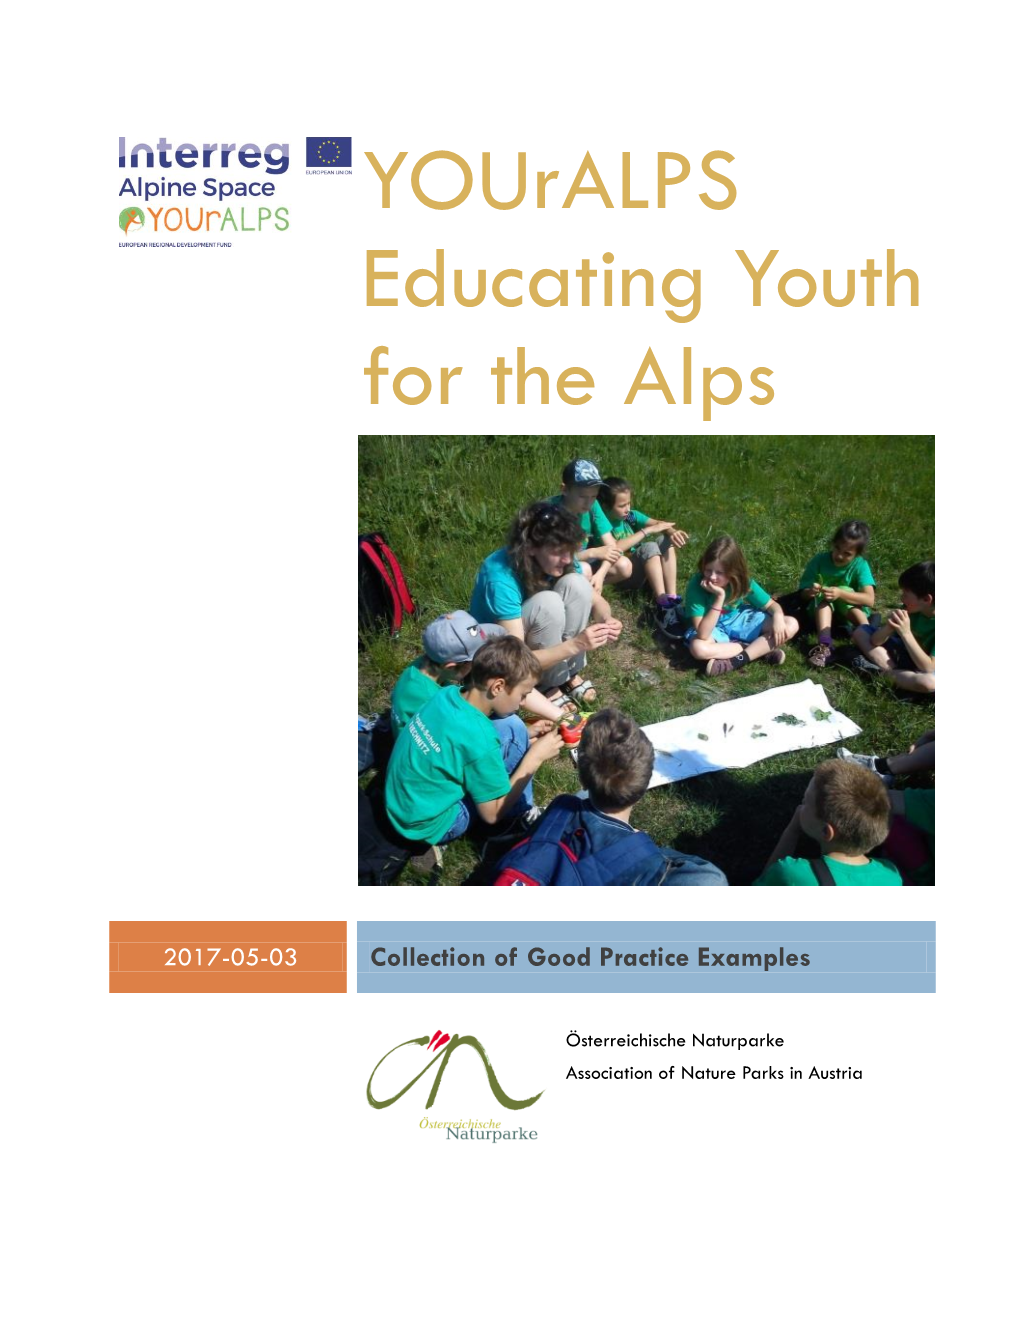 Youralps Educating Youth for the Alps